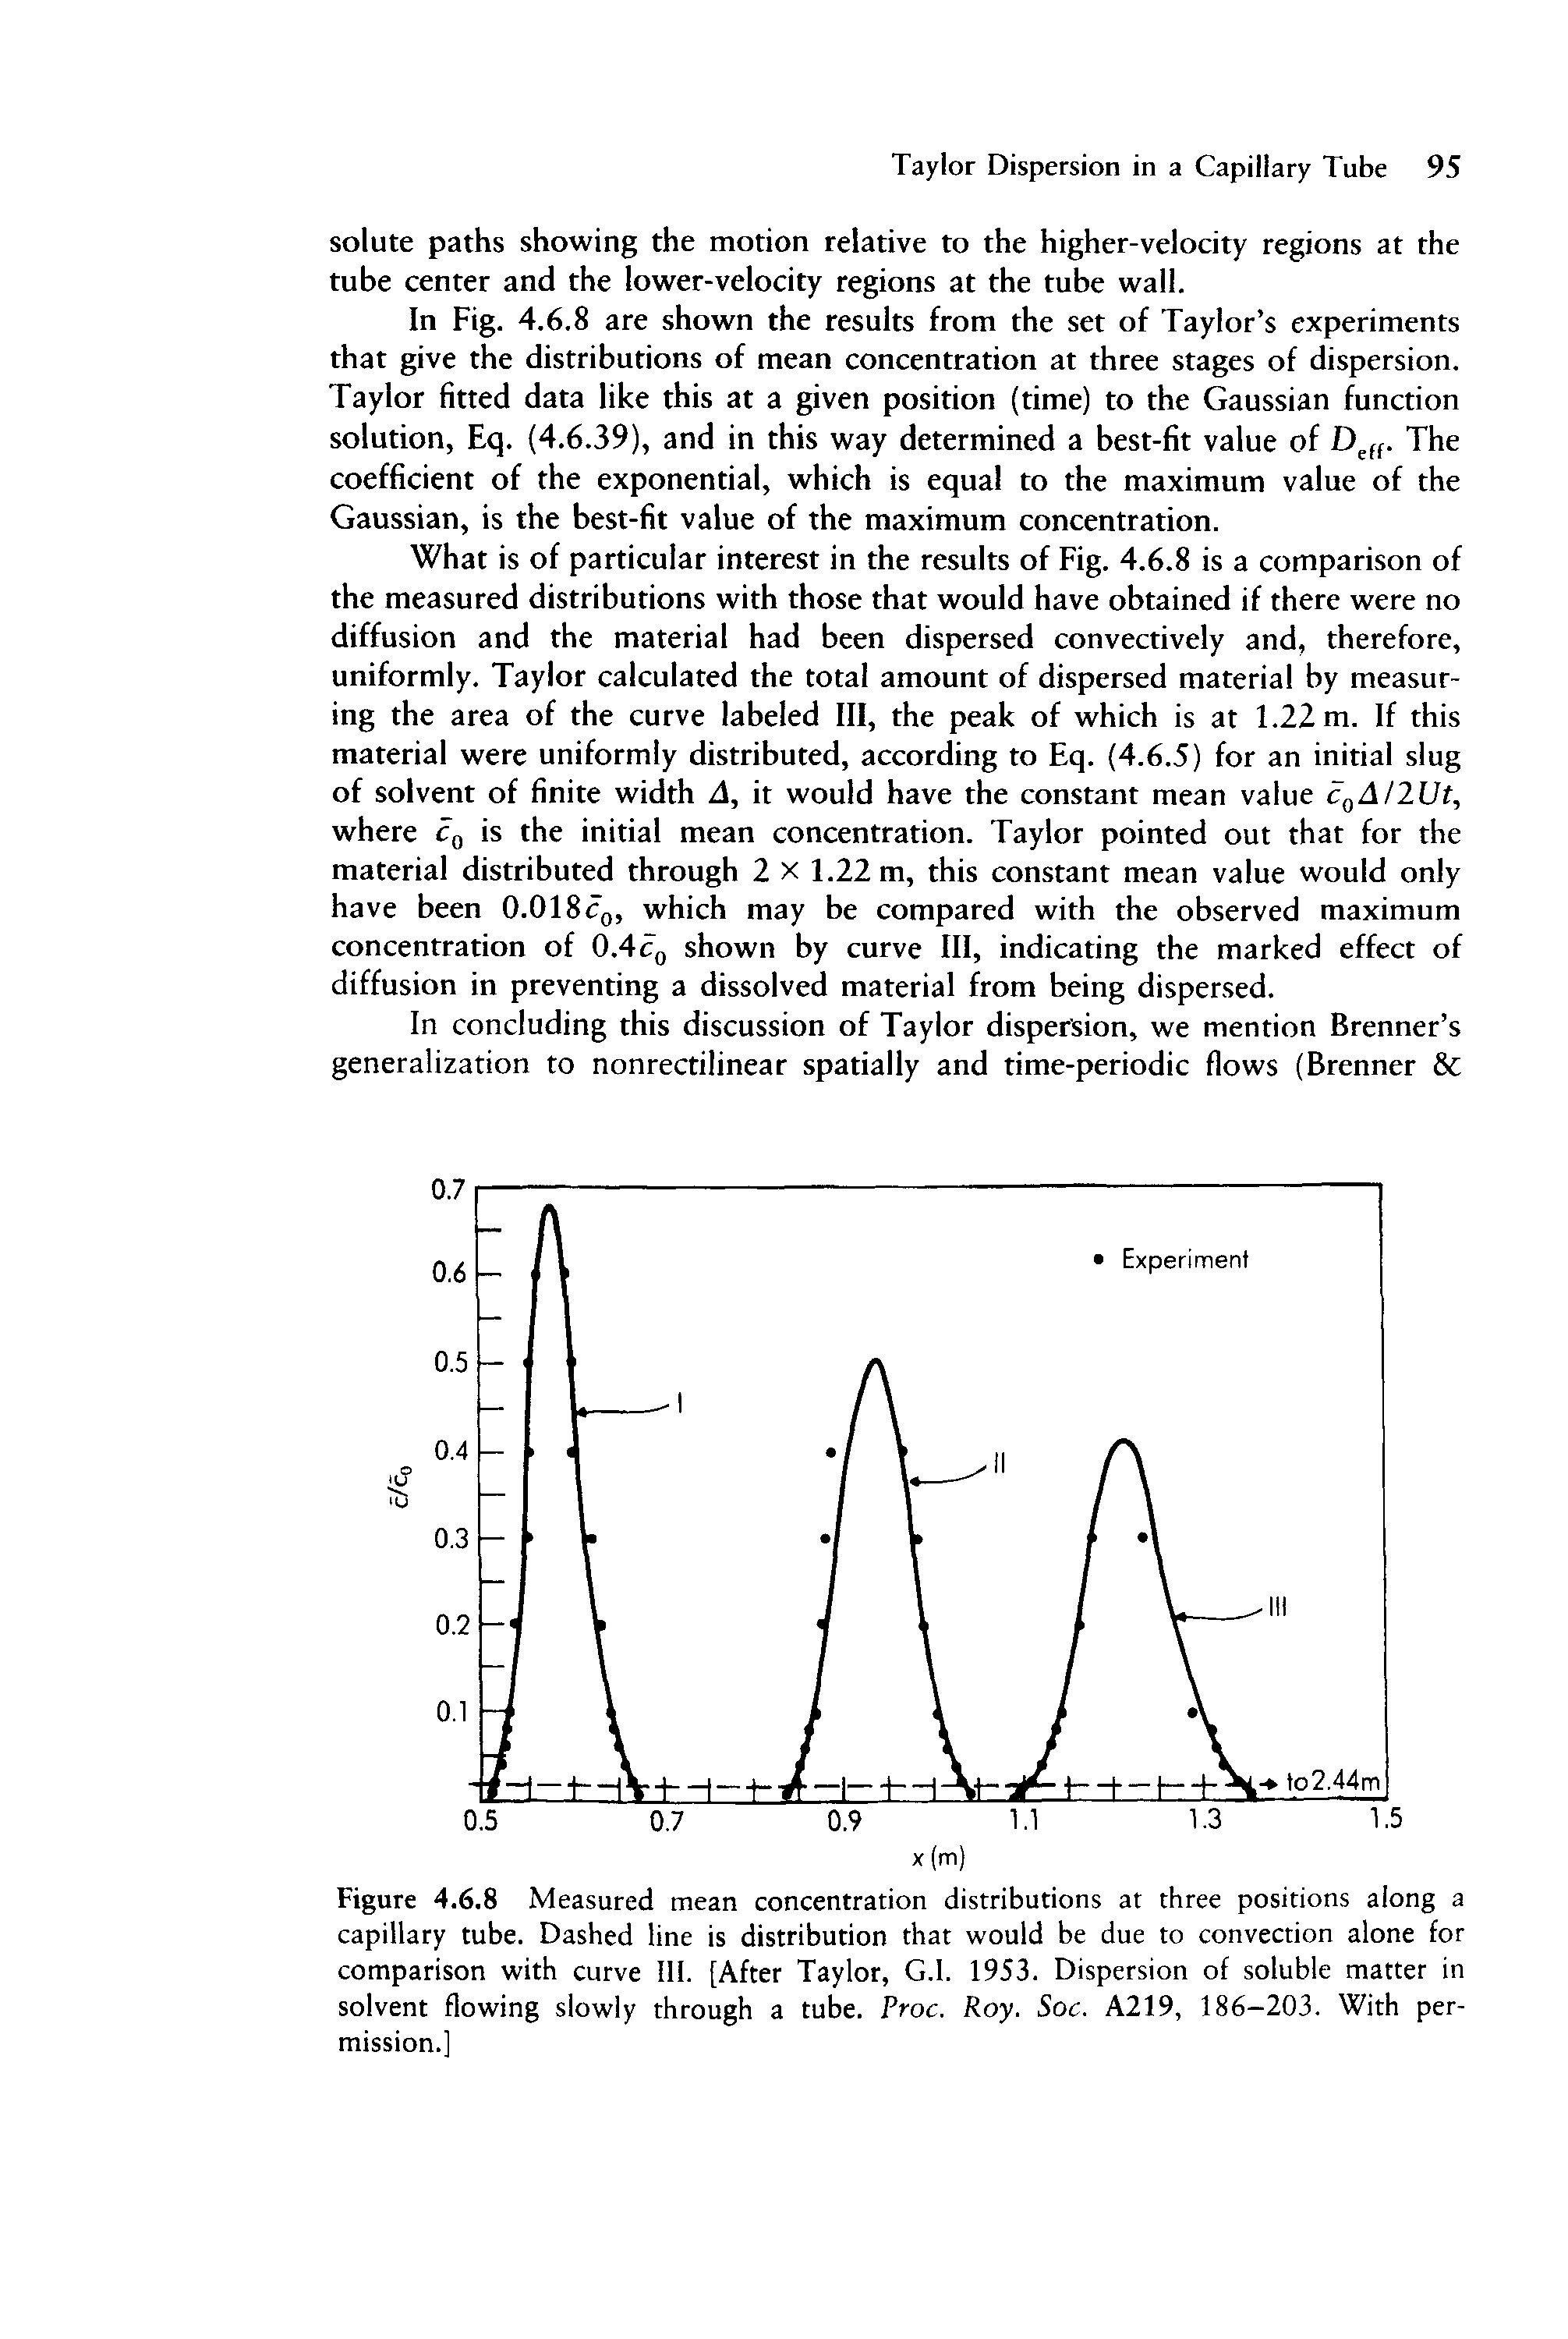 Figure 4.6.8 Measured mean concentration distributions at three positions along a capillary tube. Dashed line is distribution that would be due to convection alone for comparison with curve III. [After Taylor, G.l. 1953. Dispersion of soluble matter in solvent flowing slowly through a tube. Proc. Roy. Soc. A219, 186-203. With permission.]...